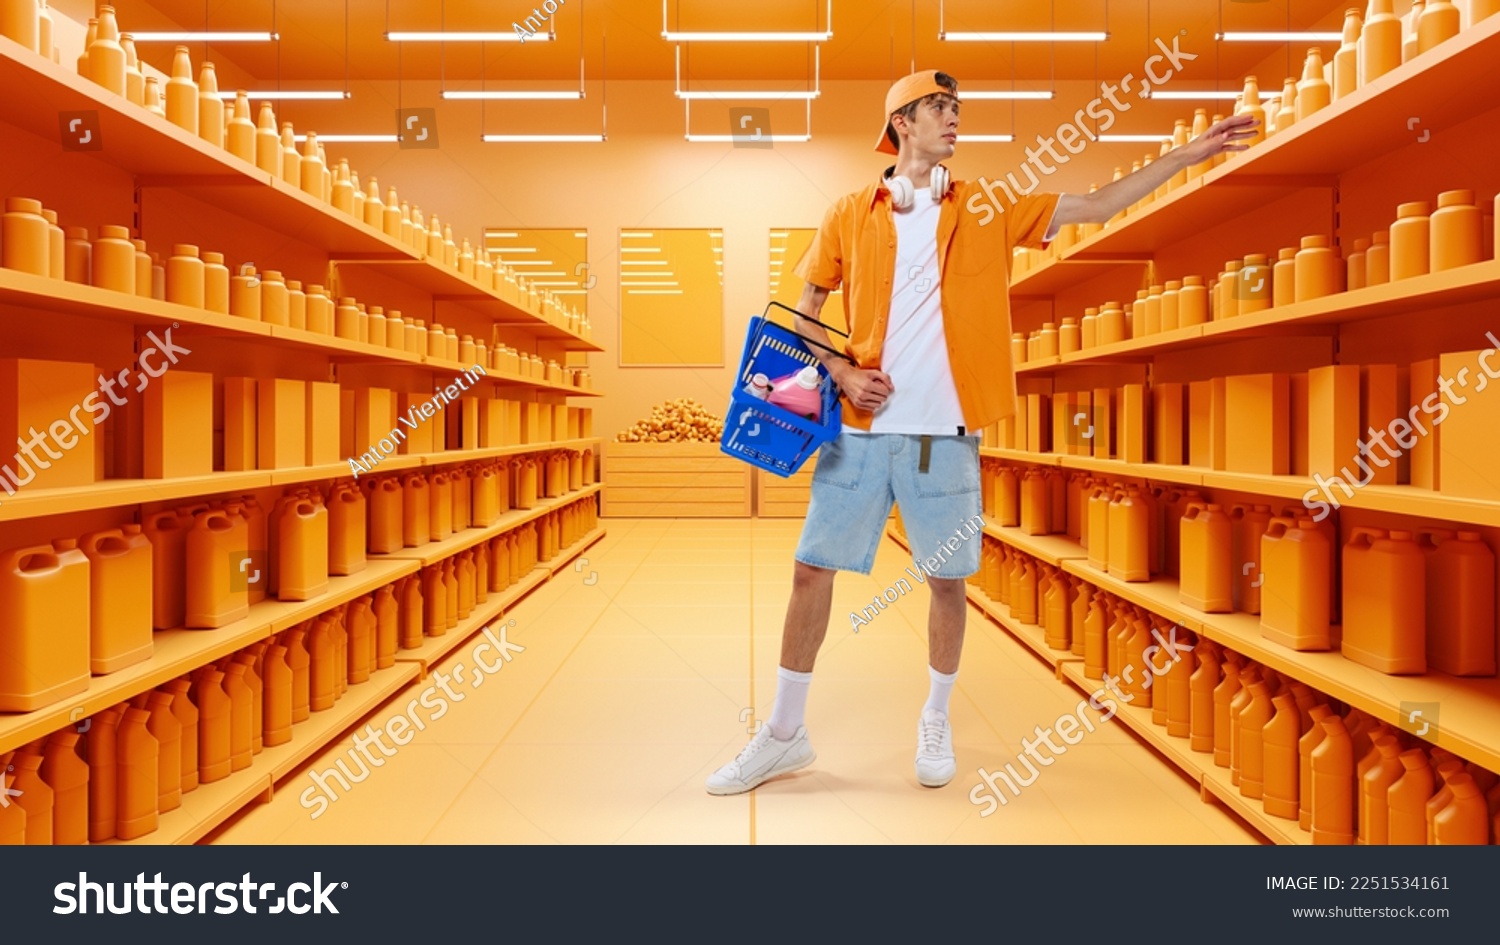 Young student in casual clothes holding cartboard box went out window shopping. Black Friday sales. 3D model of supermarket. Concept of shopping, hypermarket, purchasing. Copy space for ad #2251534161